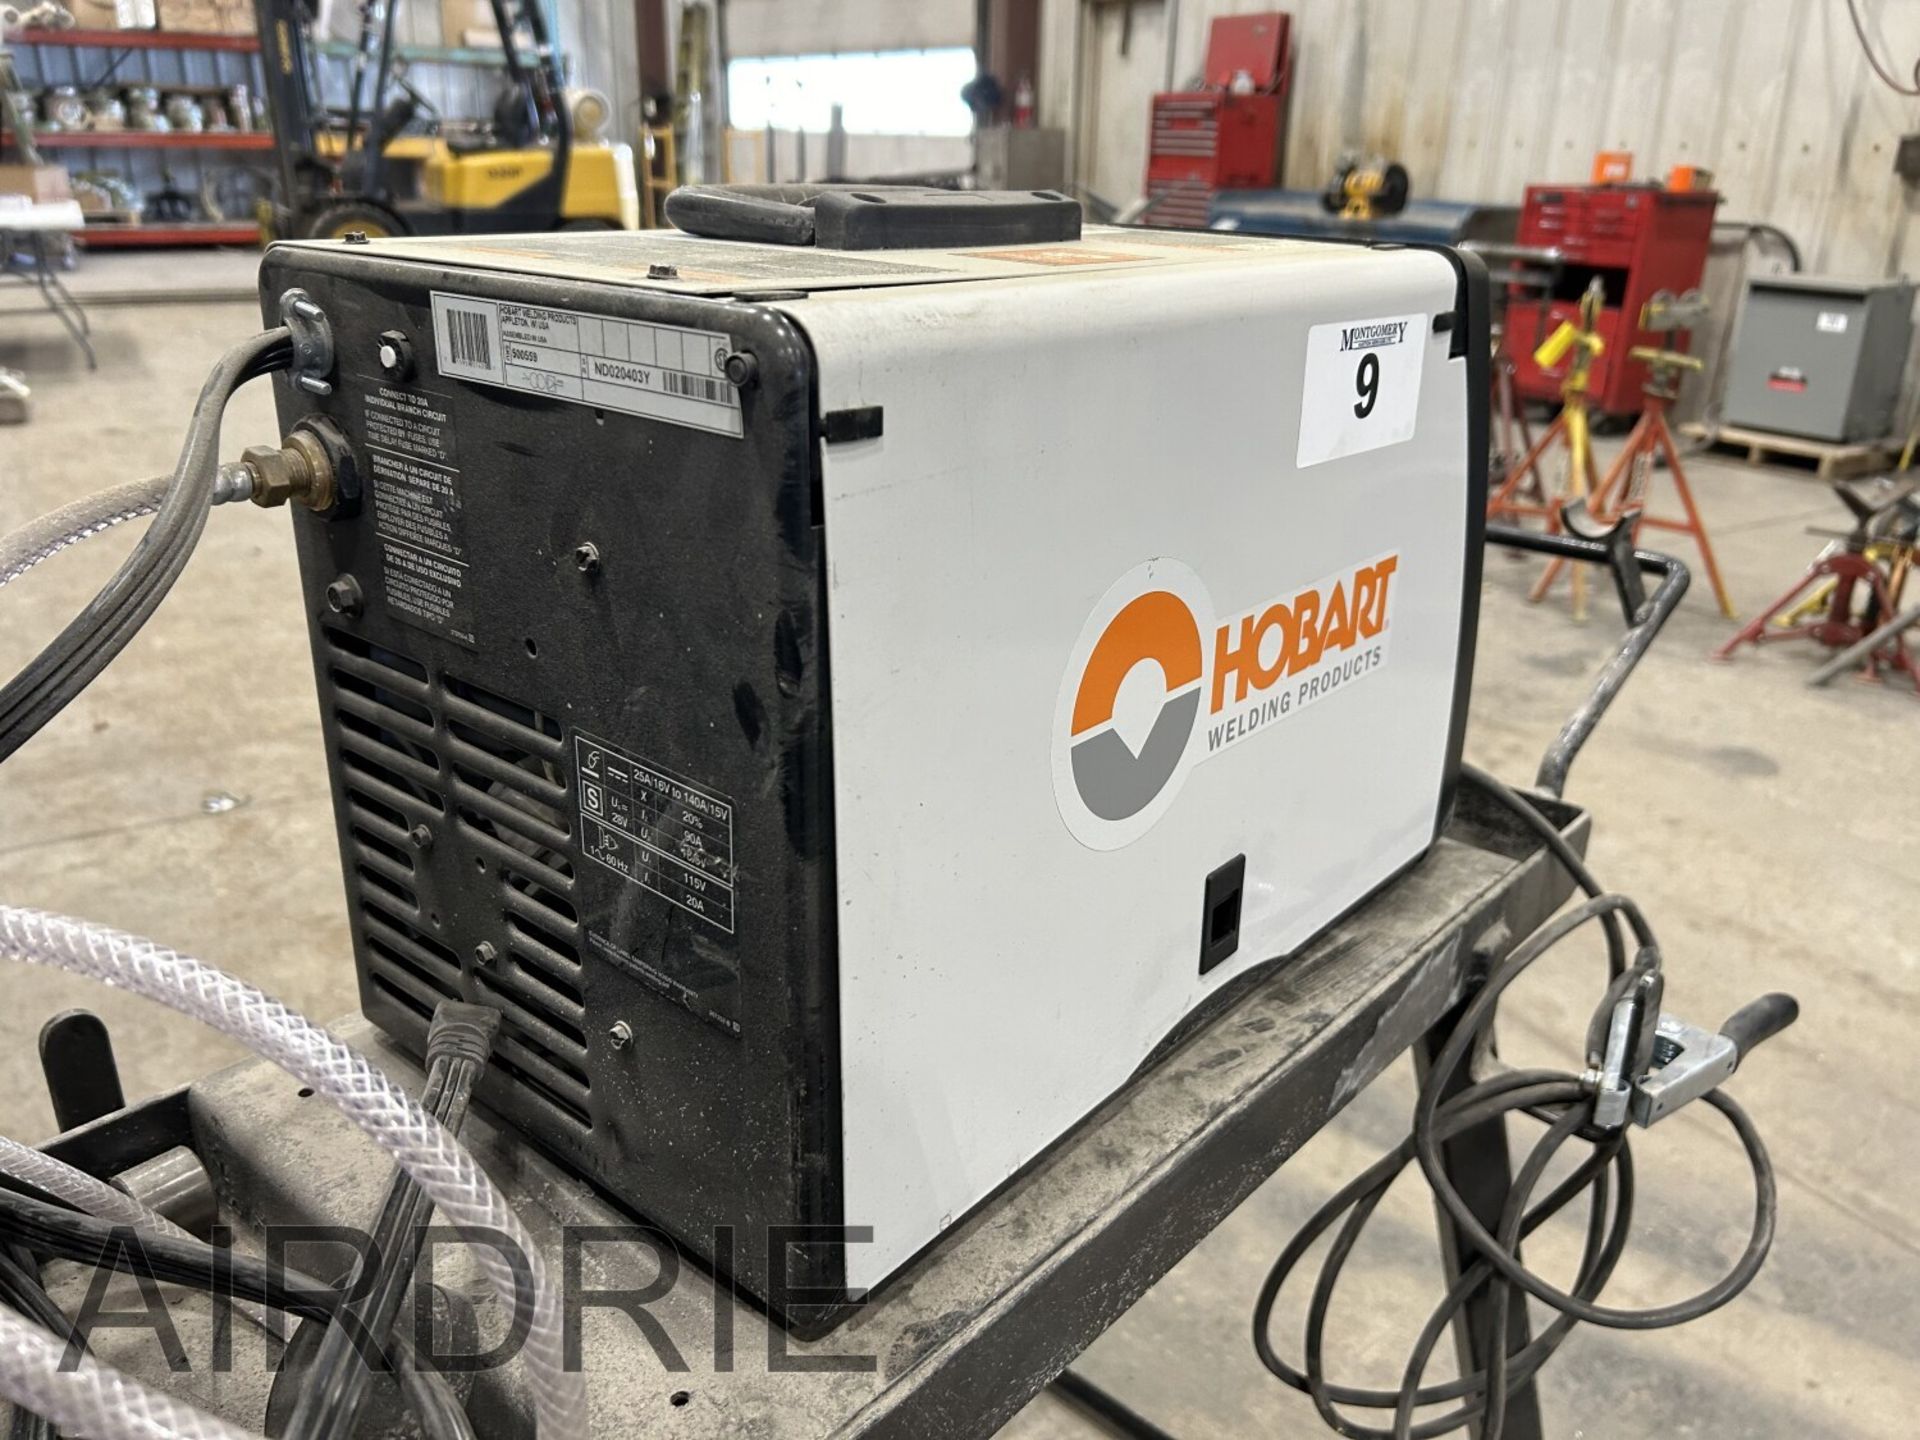 *OFFSITE* HOBART HANDLER 140 115V WIRE FEED WELDER 25-140 AMP OUTFEED ON CART S/N ND020403Y - Image 8 of 9